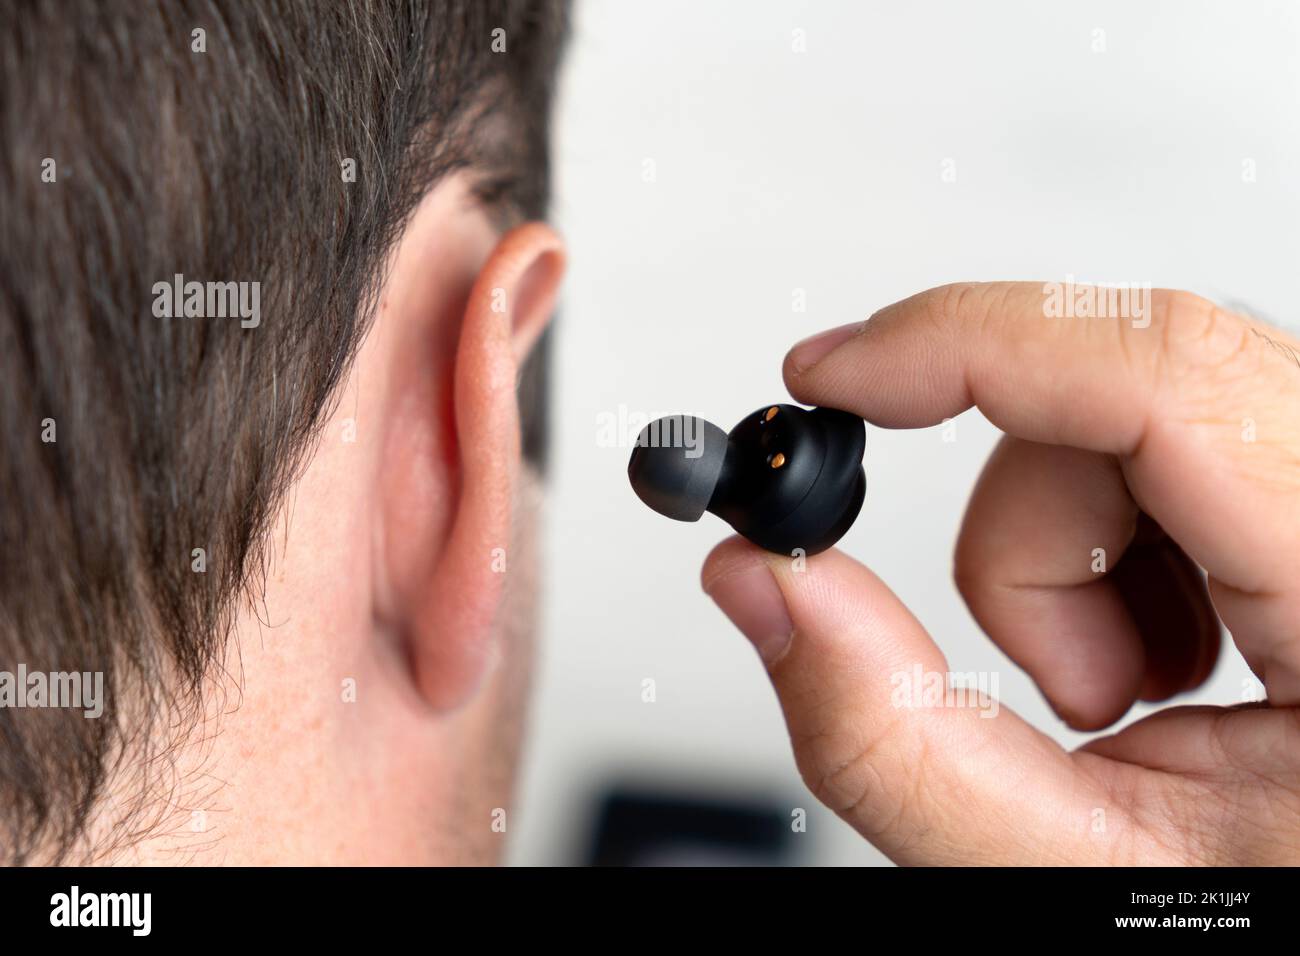 the small black earphones inserted into the ear of men close up. insert the earphone into the ear Stock Photo